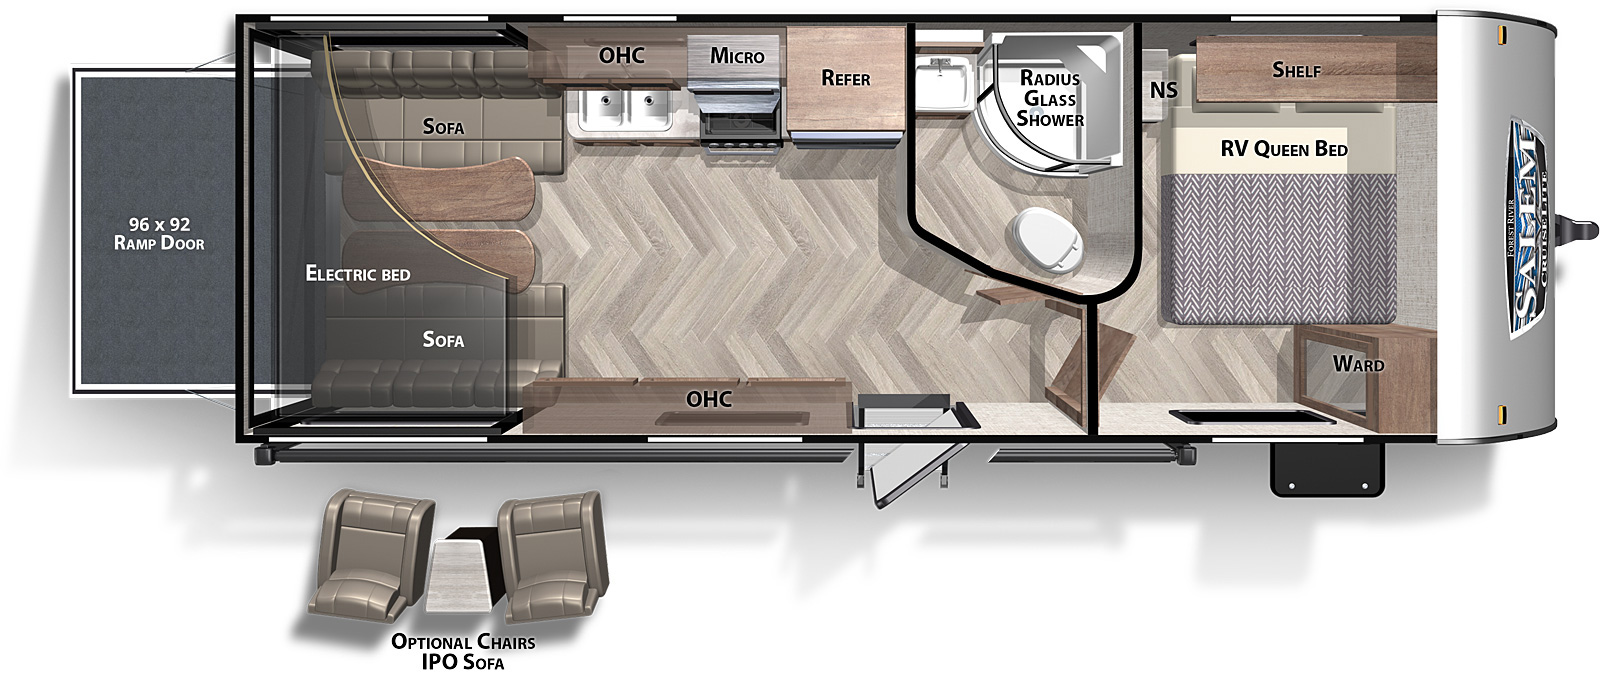 Cruise Lite Northwest 211SSXL floorplan. The 211SSXL has no slide outs and one entry door.